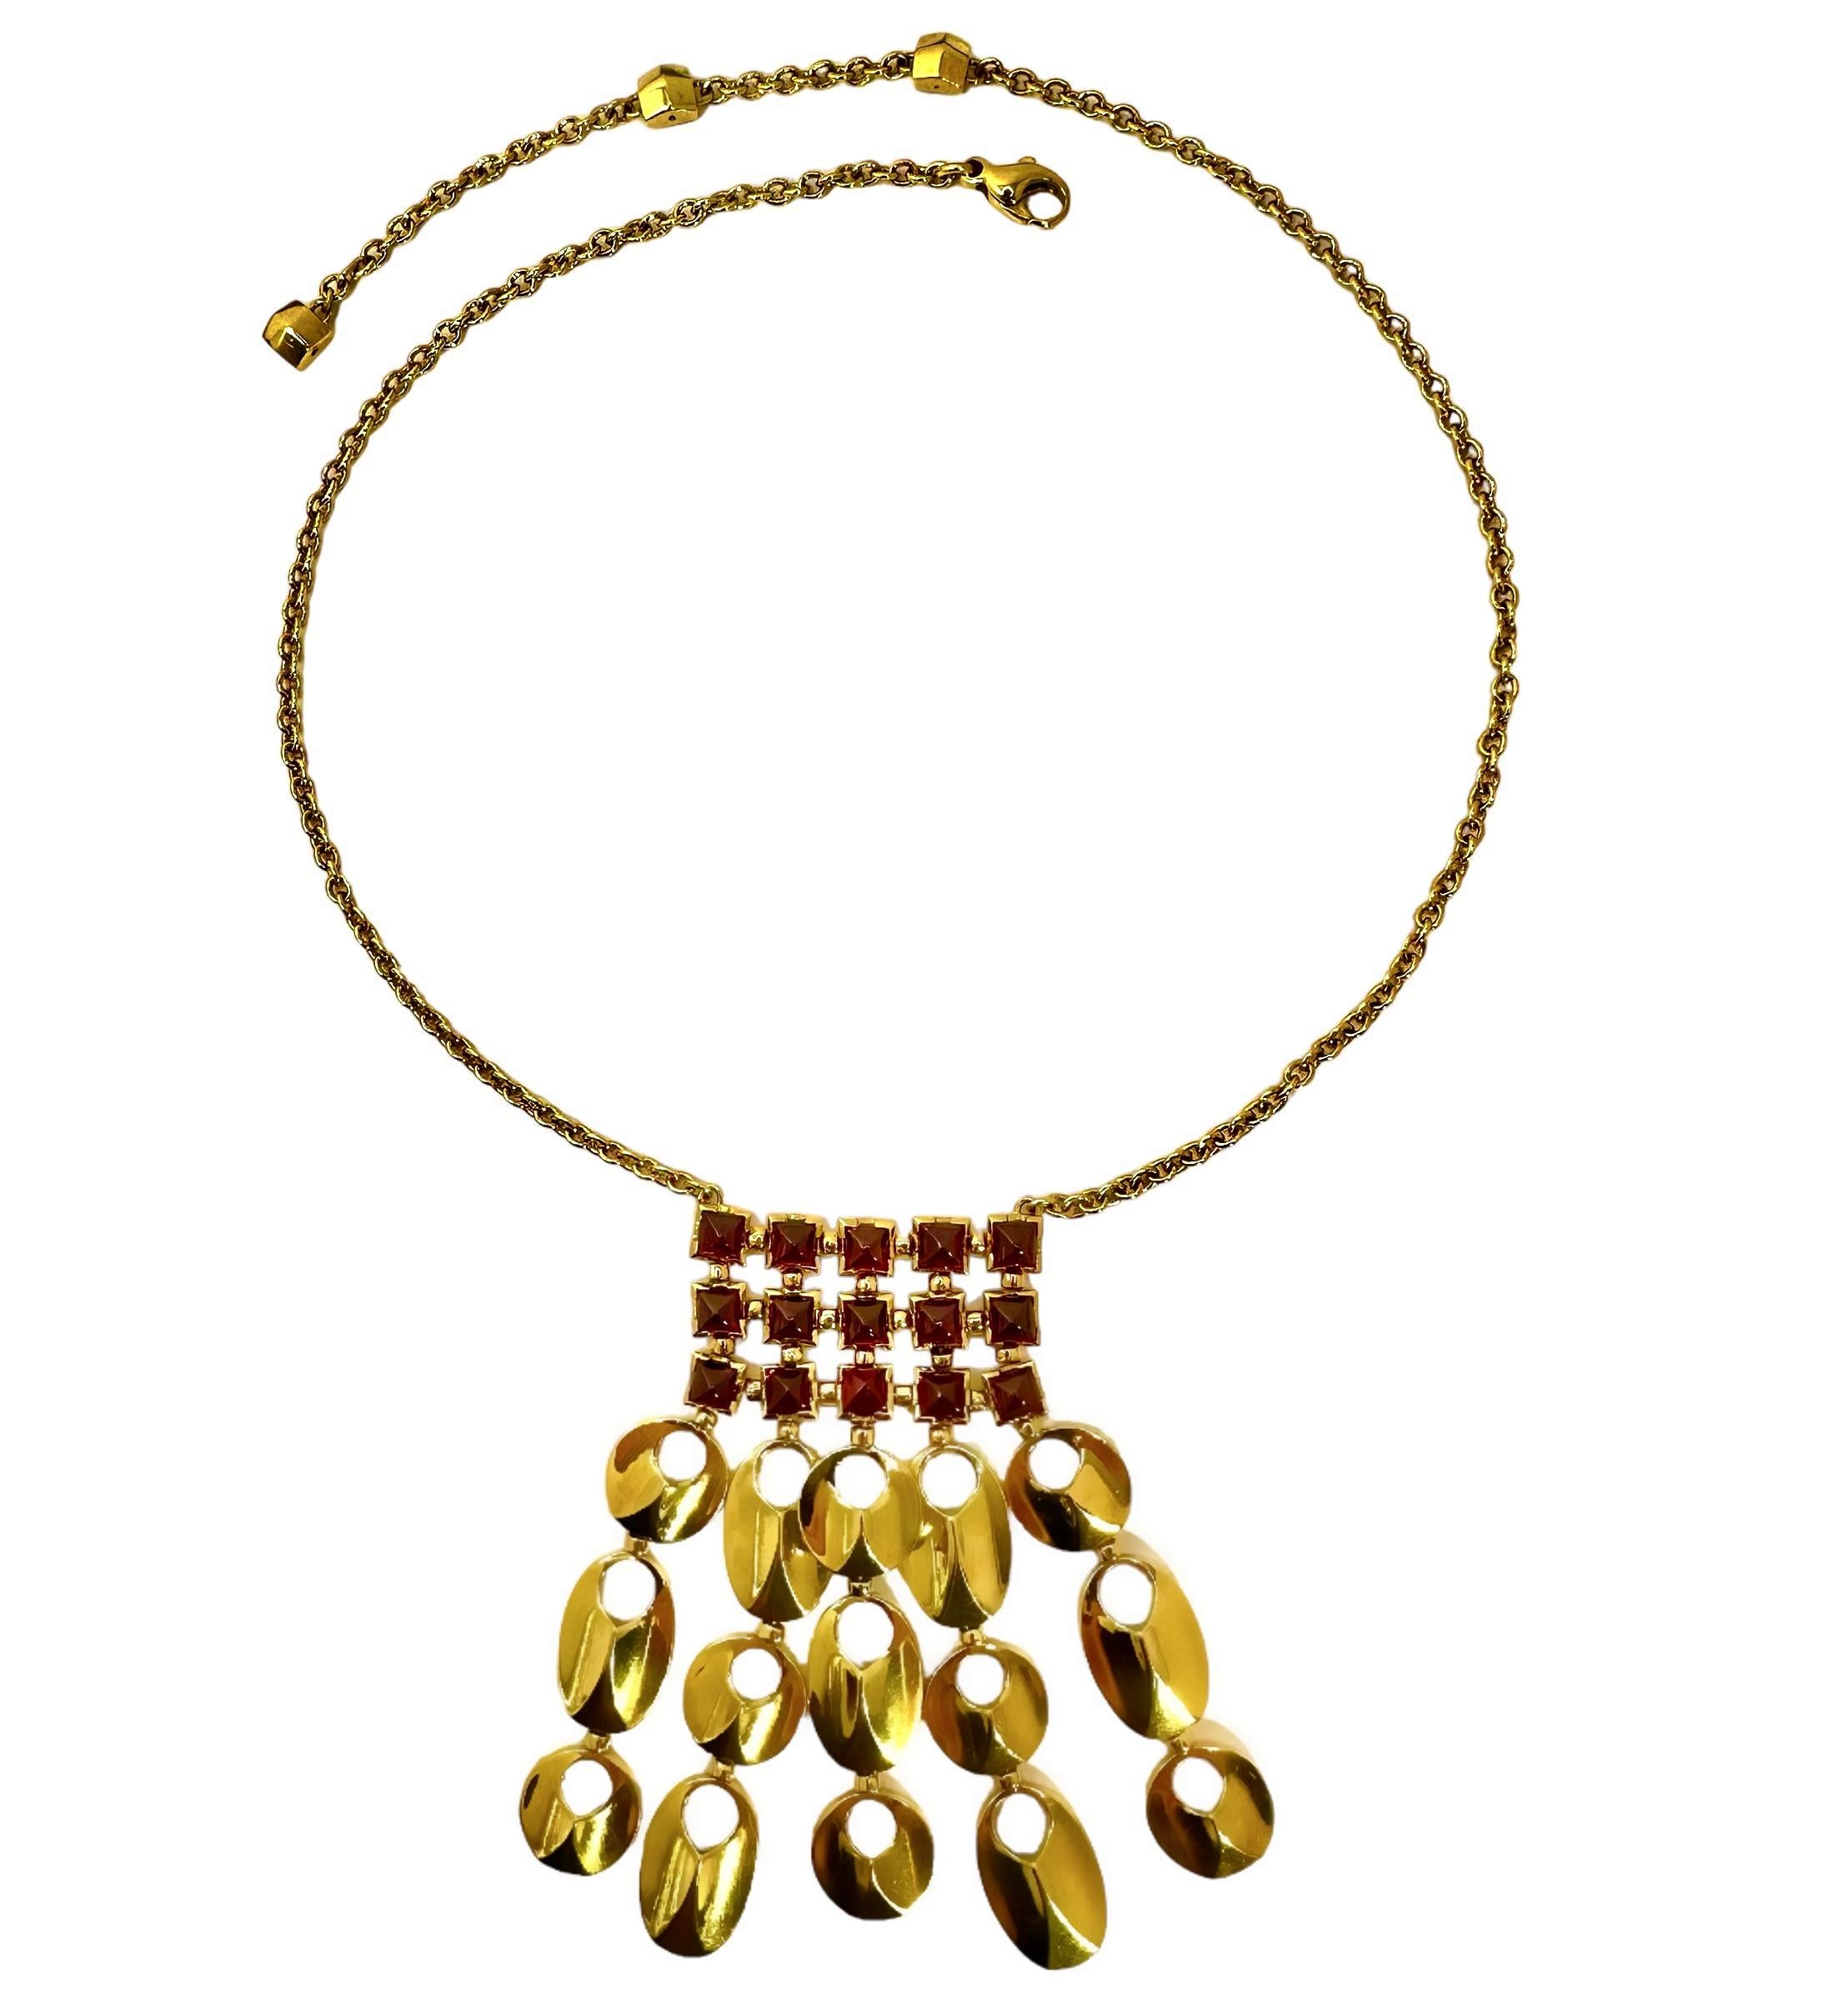 Modernist Playful 18k Yellow Gold and Sugar-loaf Citrine Necklace and Matching Earring Set